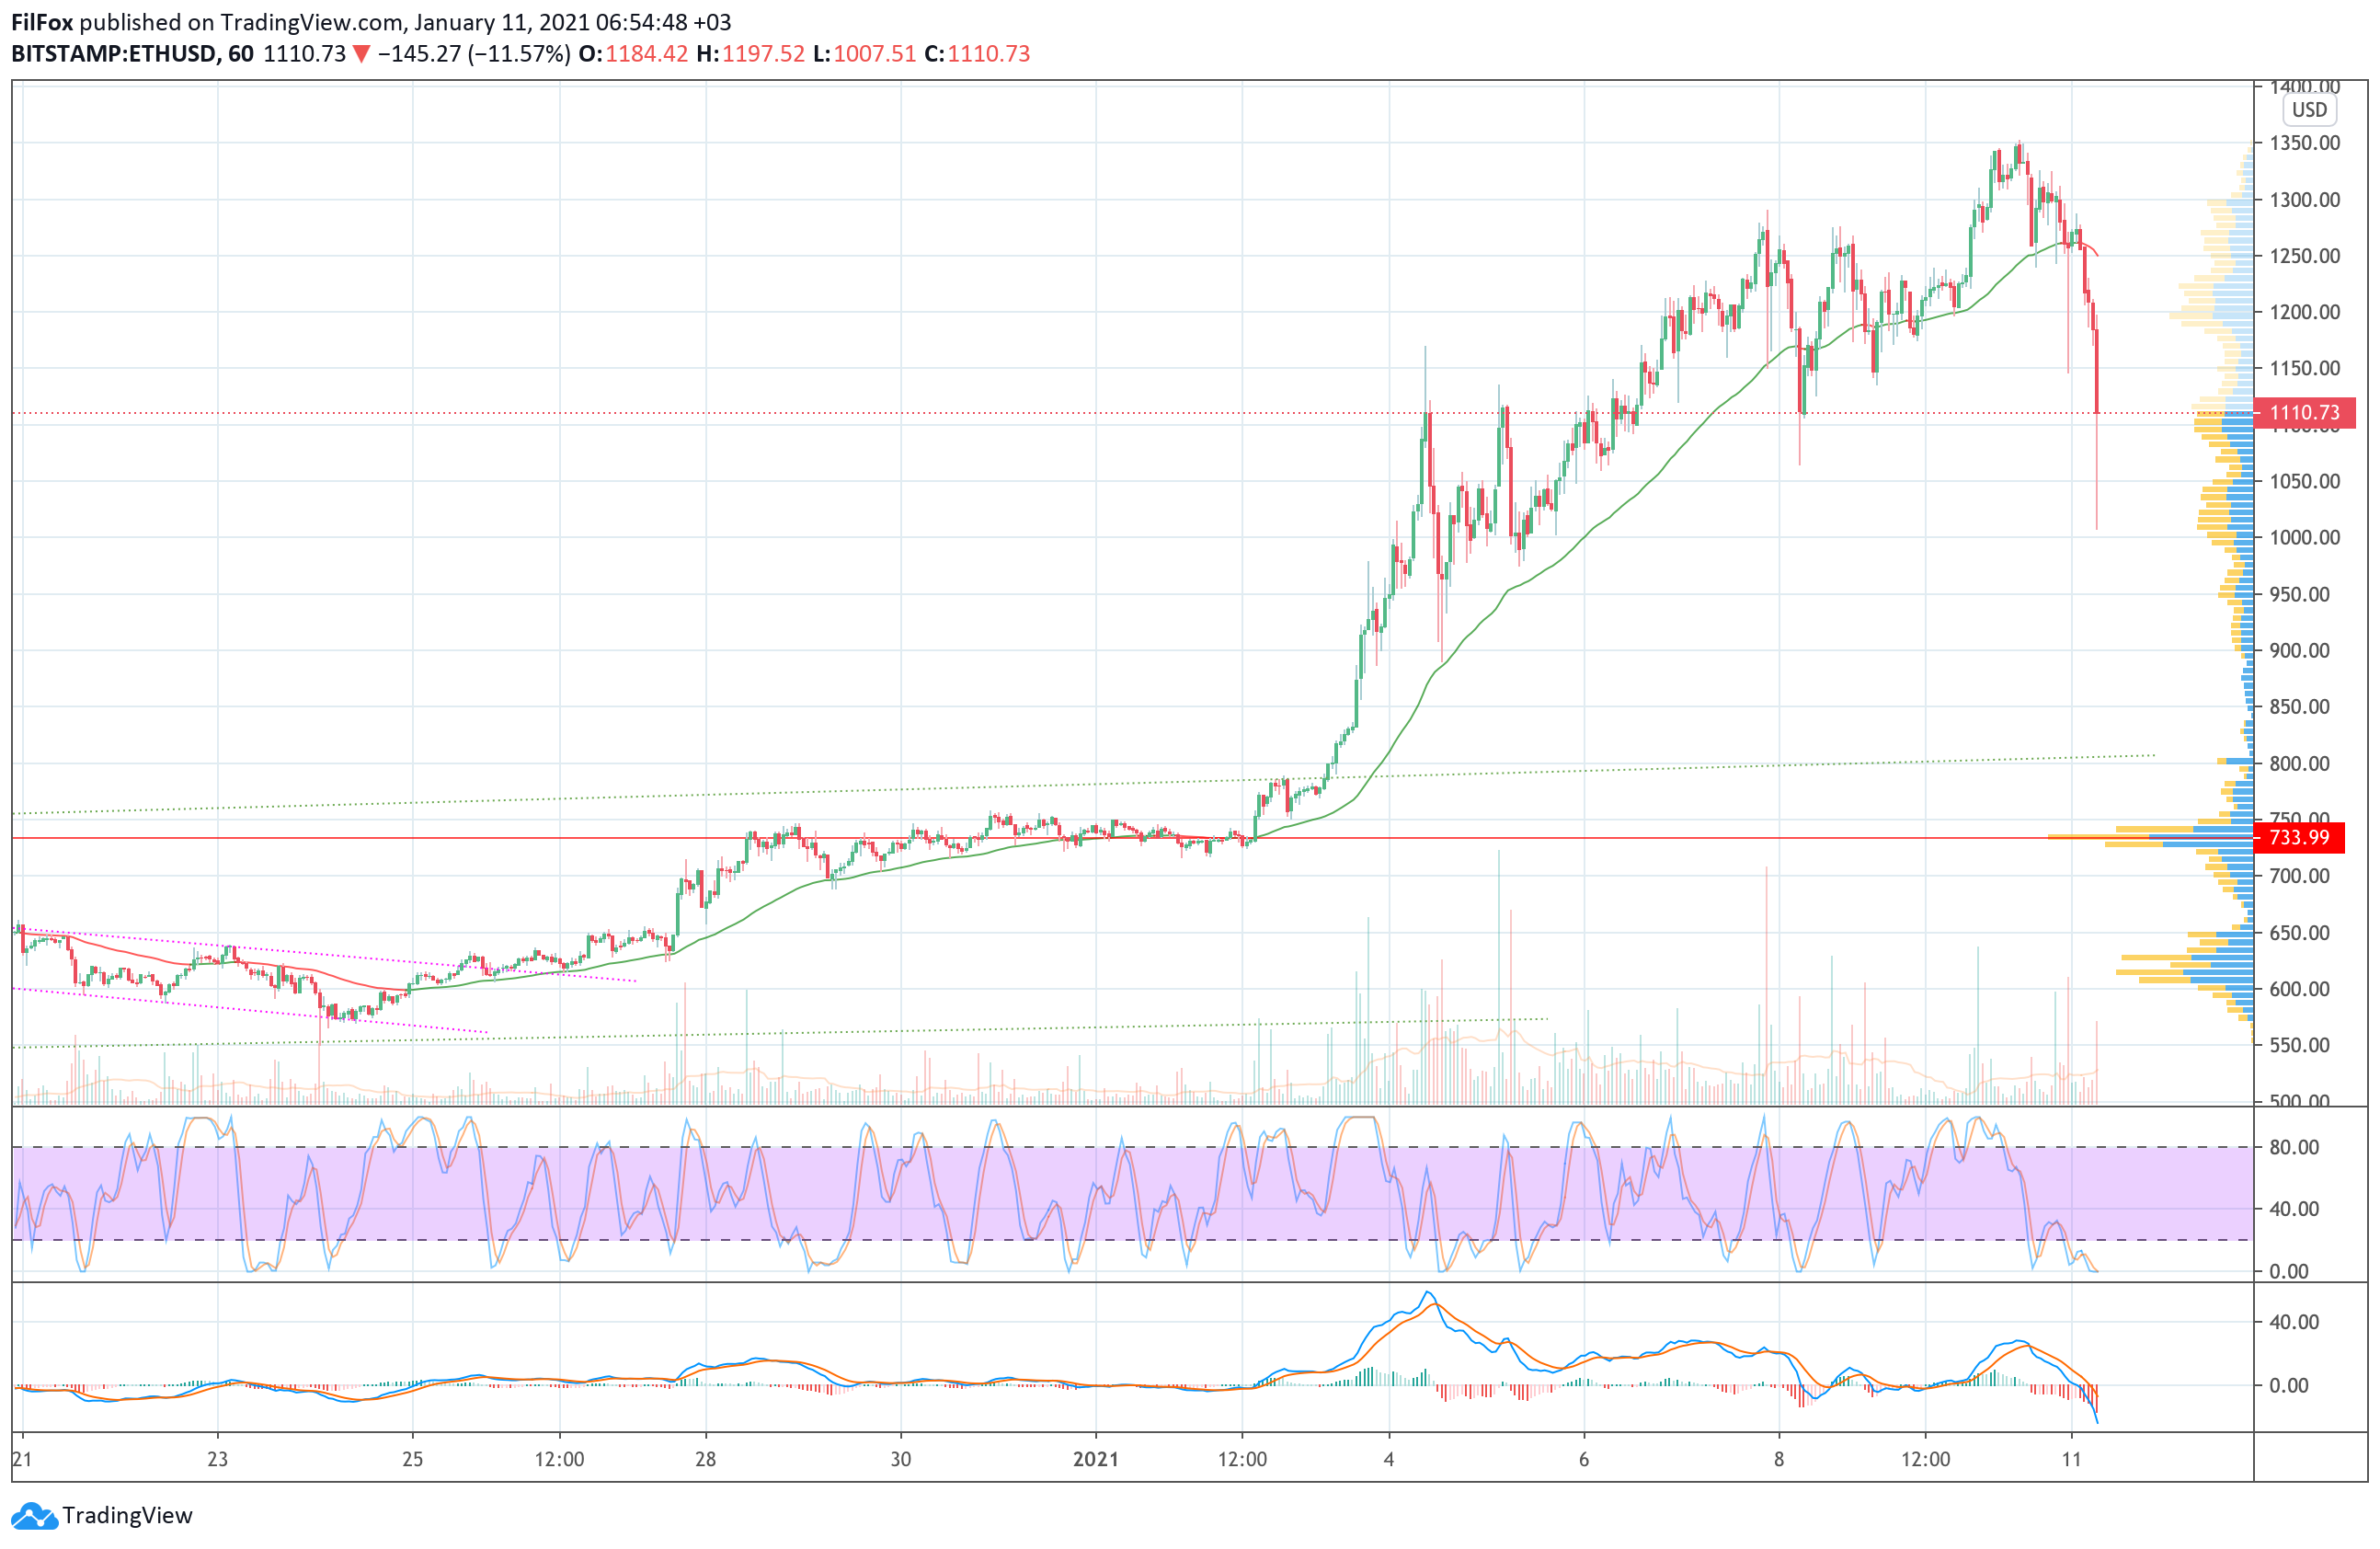 Analysis of prices for Bitcoin, Ethereum, Ripple for 01/11/2021